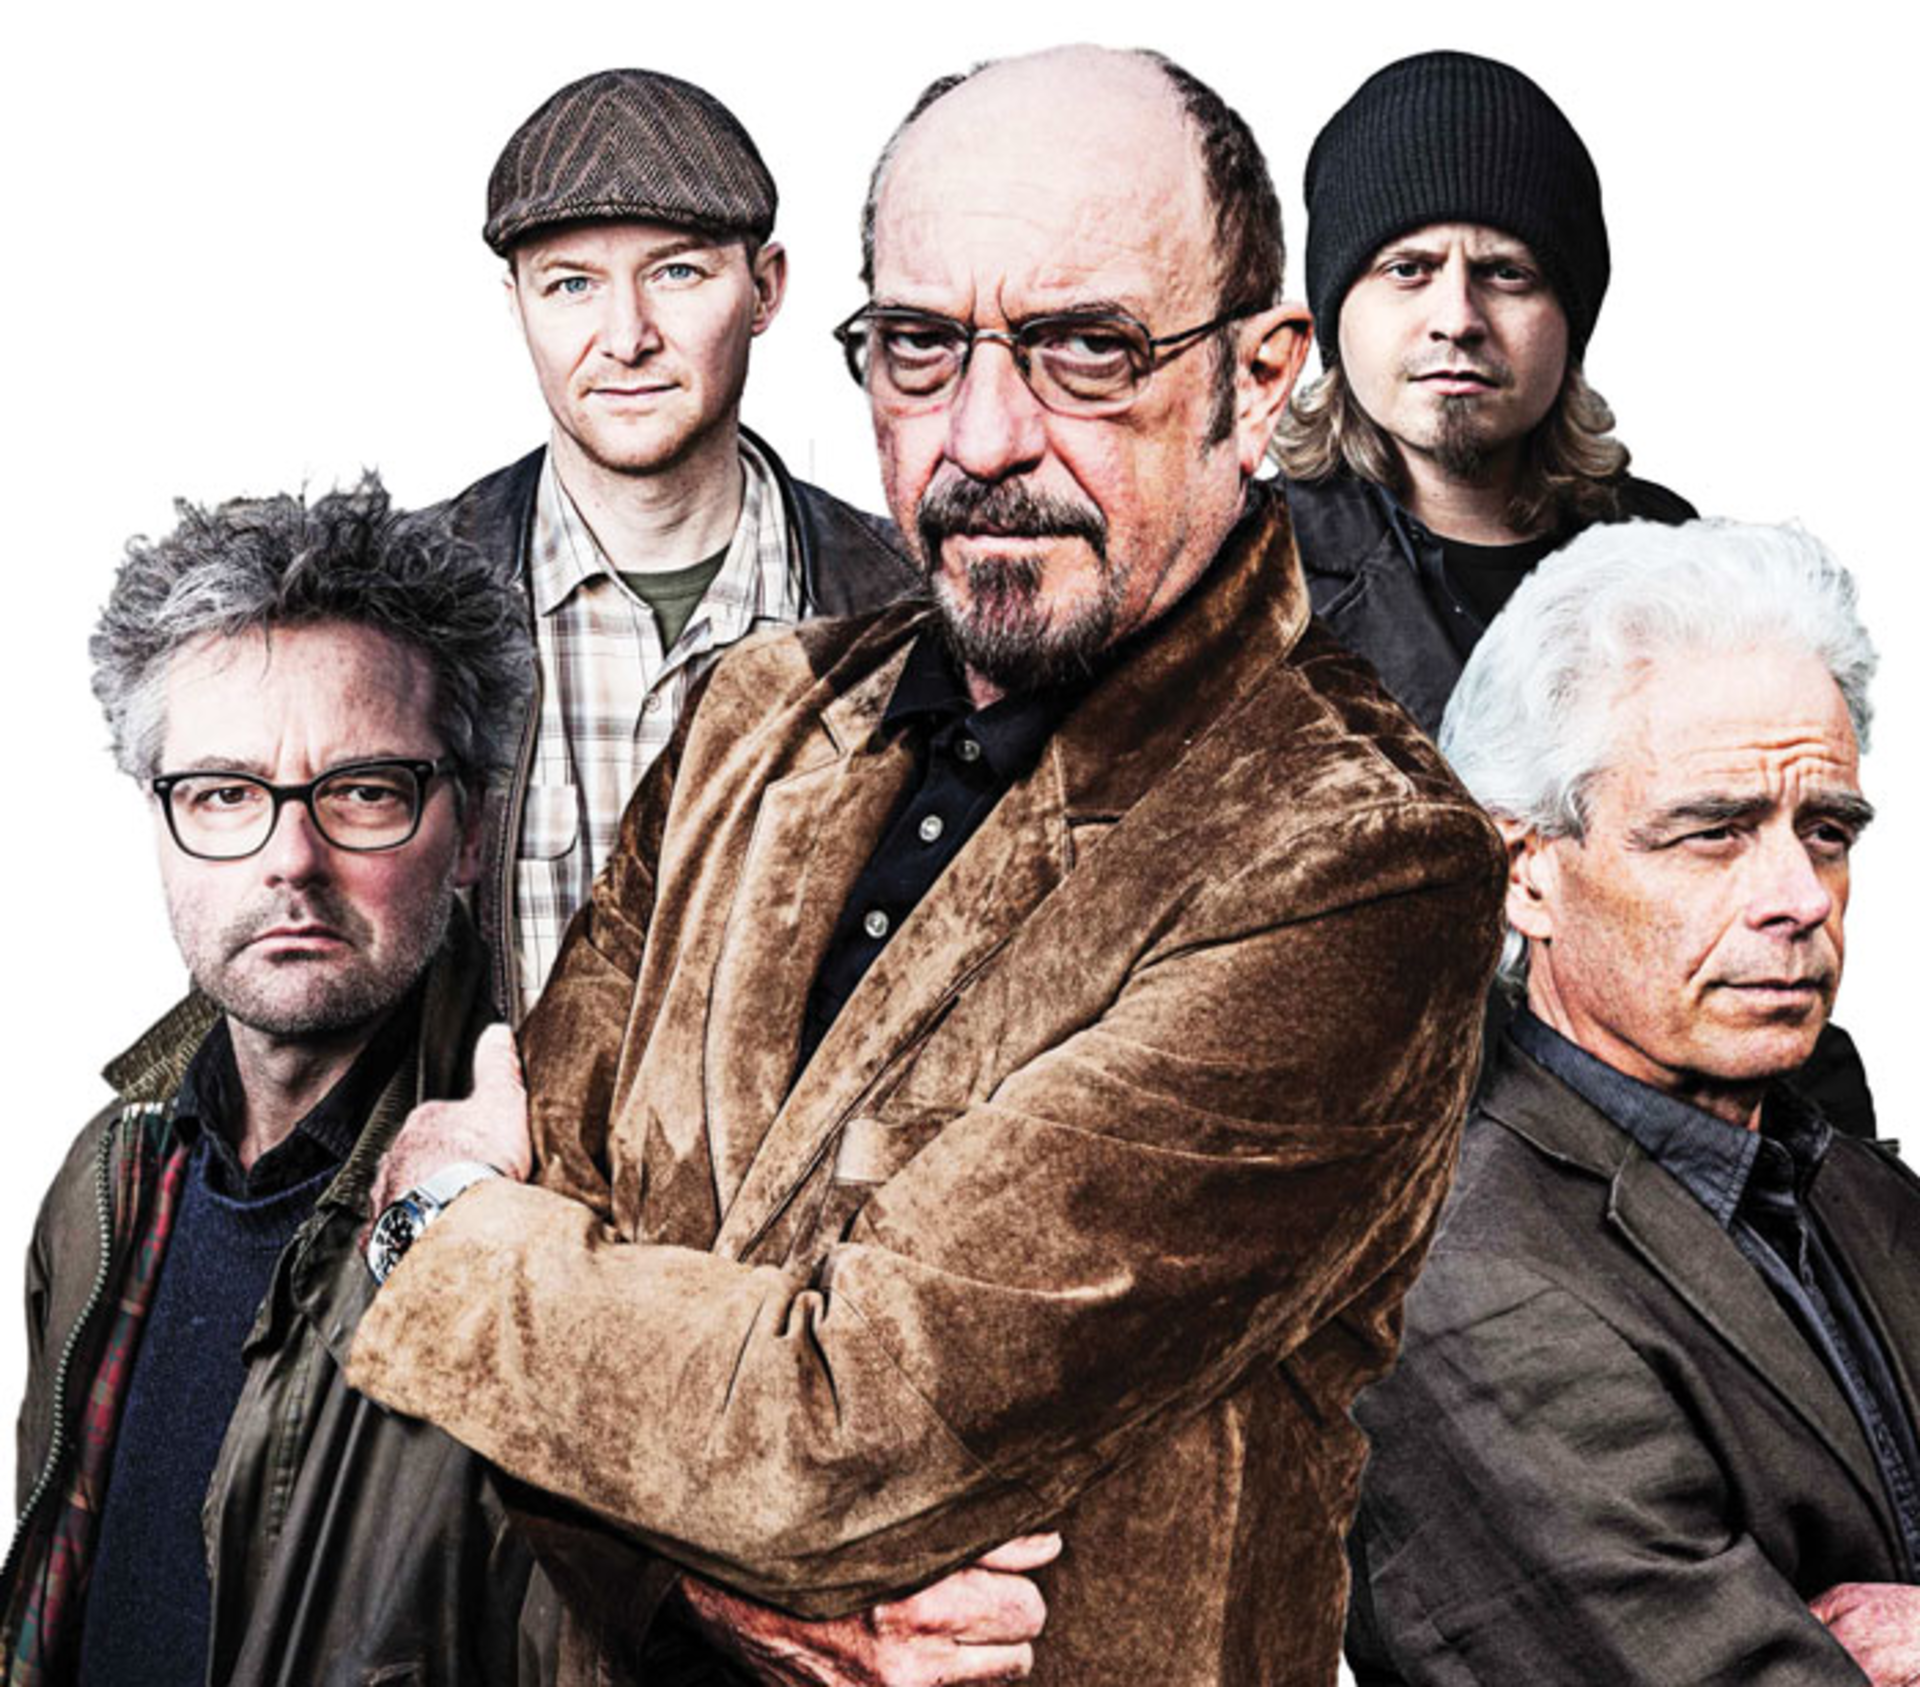 The Ian Anderson, and the Tale of Jethro Tull.